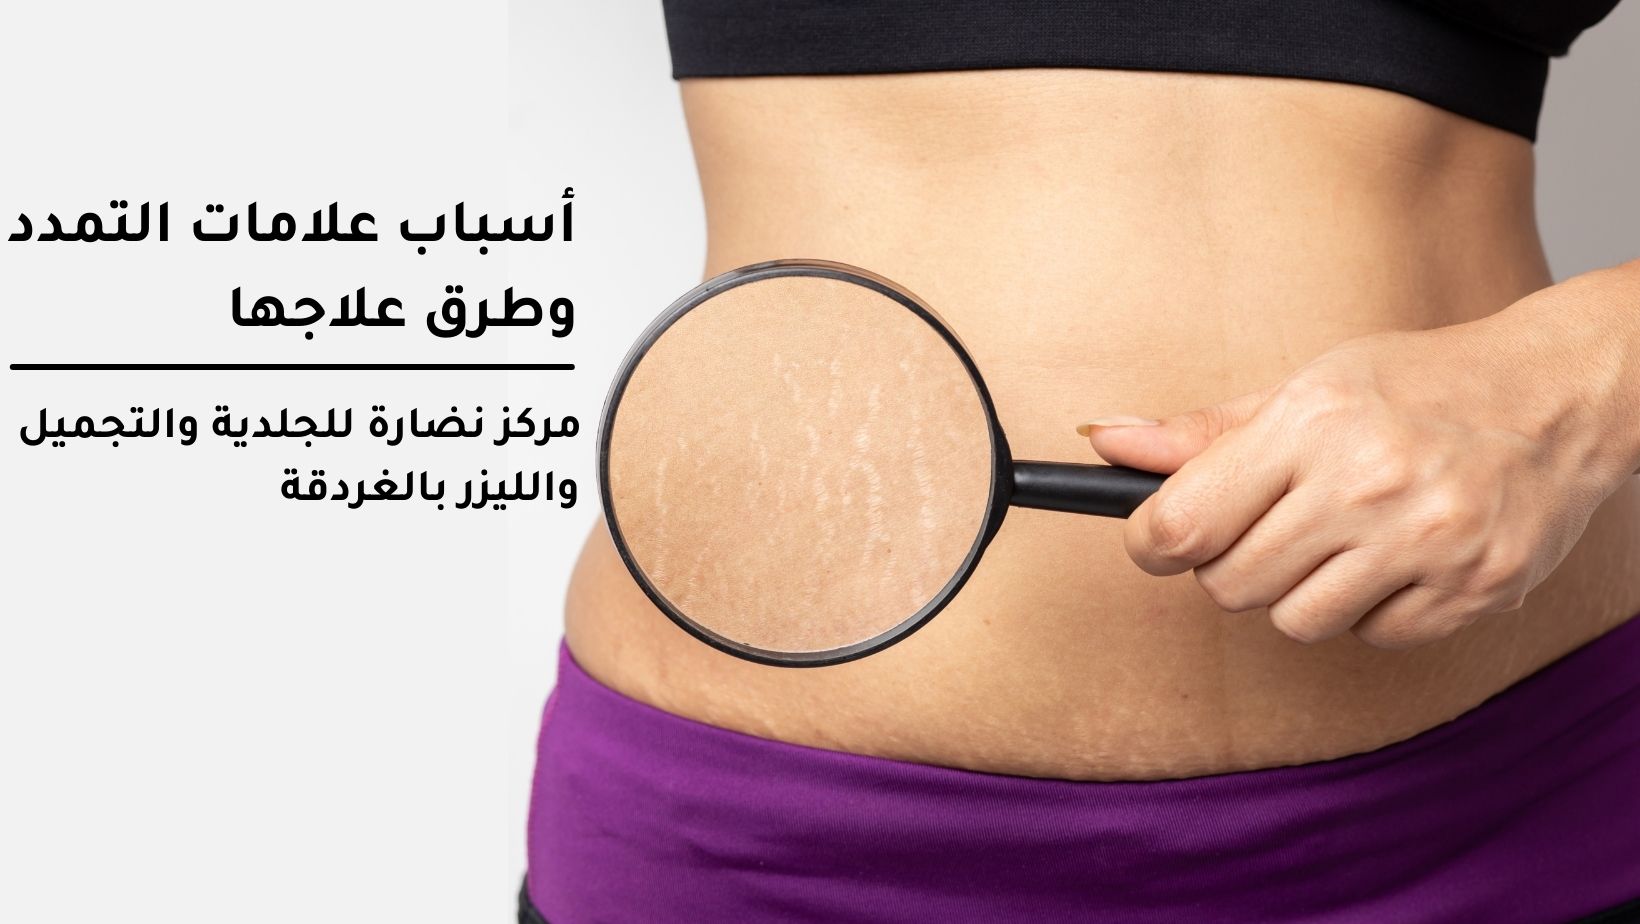 Causes of stretch marks and ways to treat them